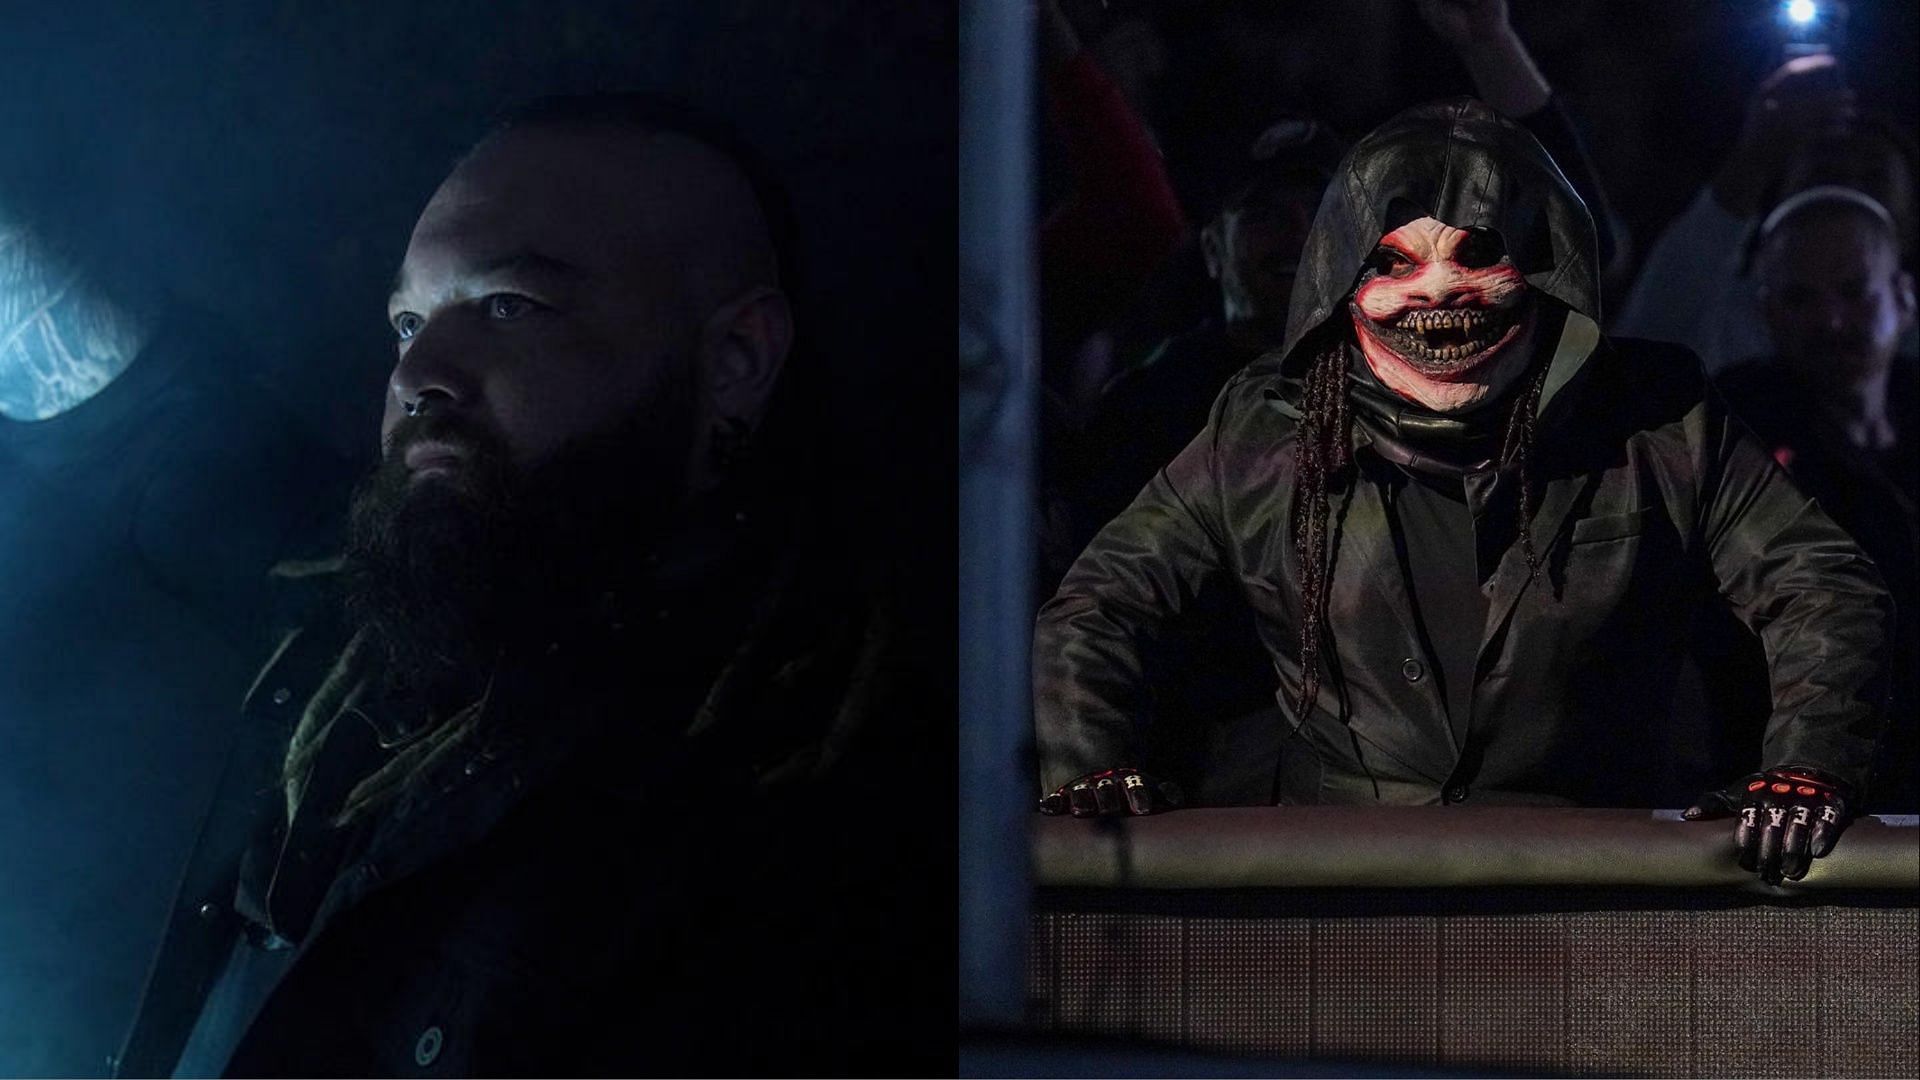 Bray Wyatt and The Fiend returned at Extreme Rules 2022.